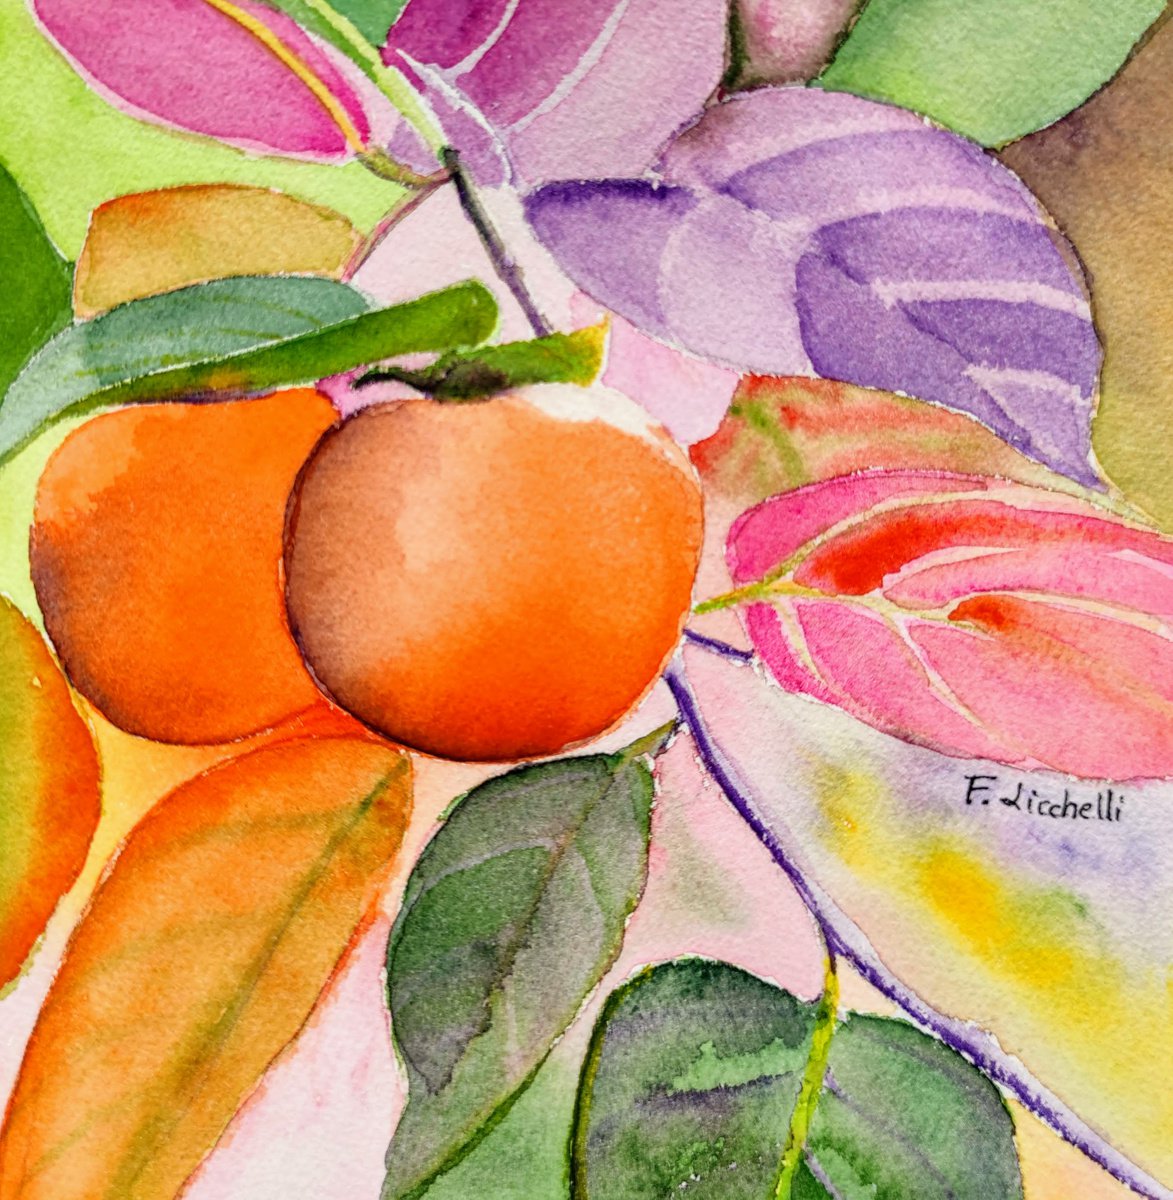 Persimmons by Francesca Licchelli